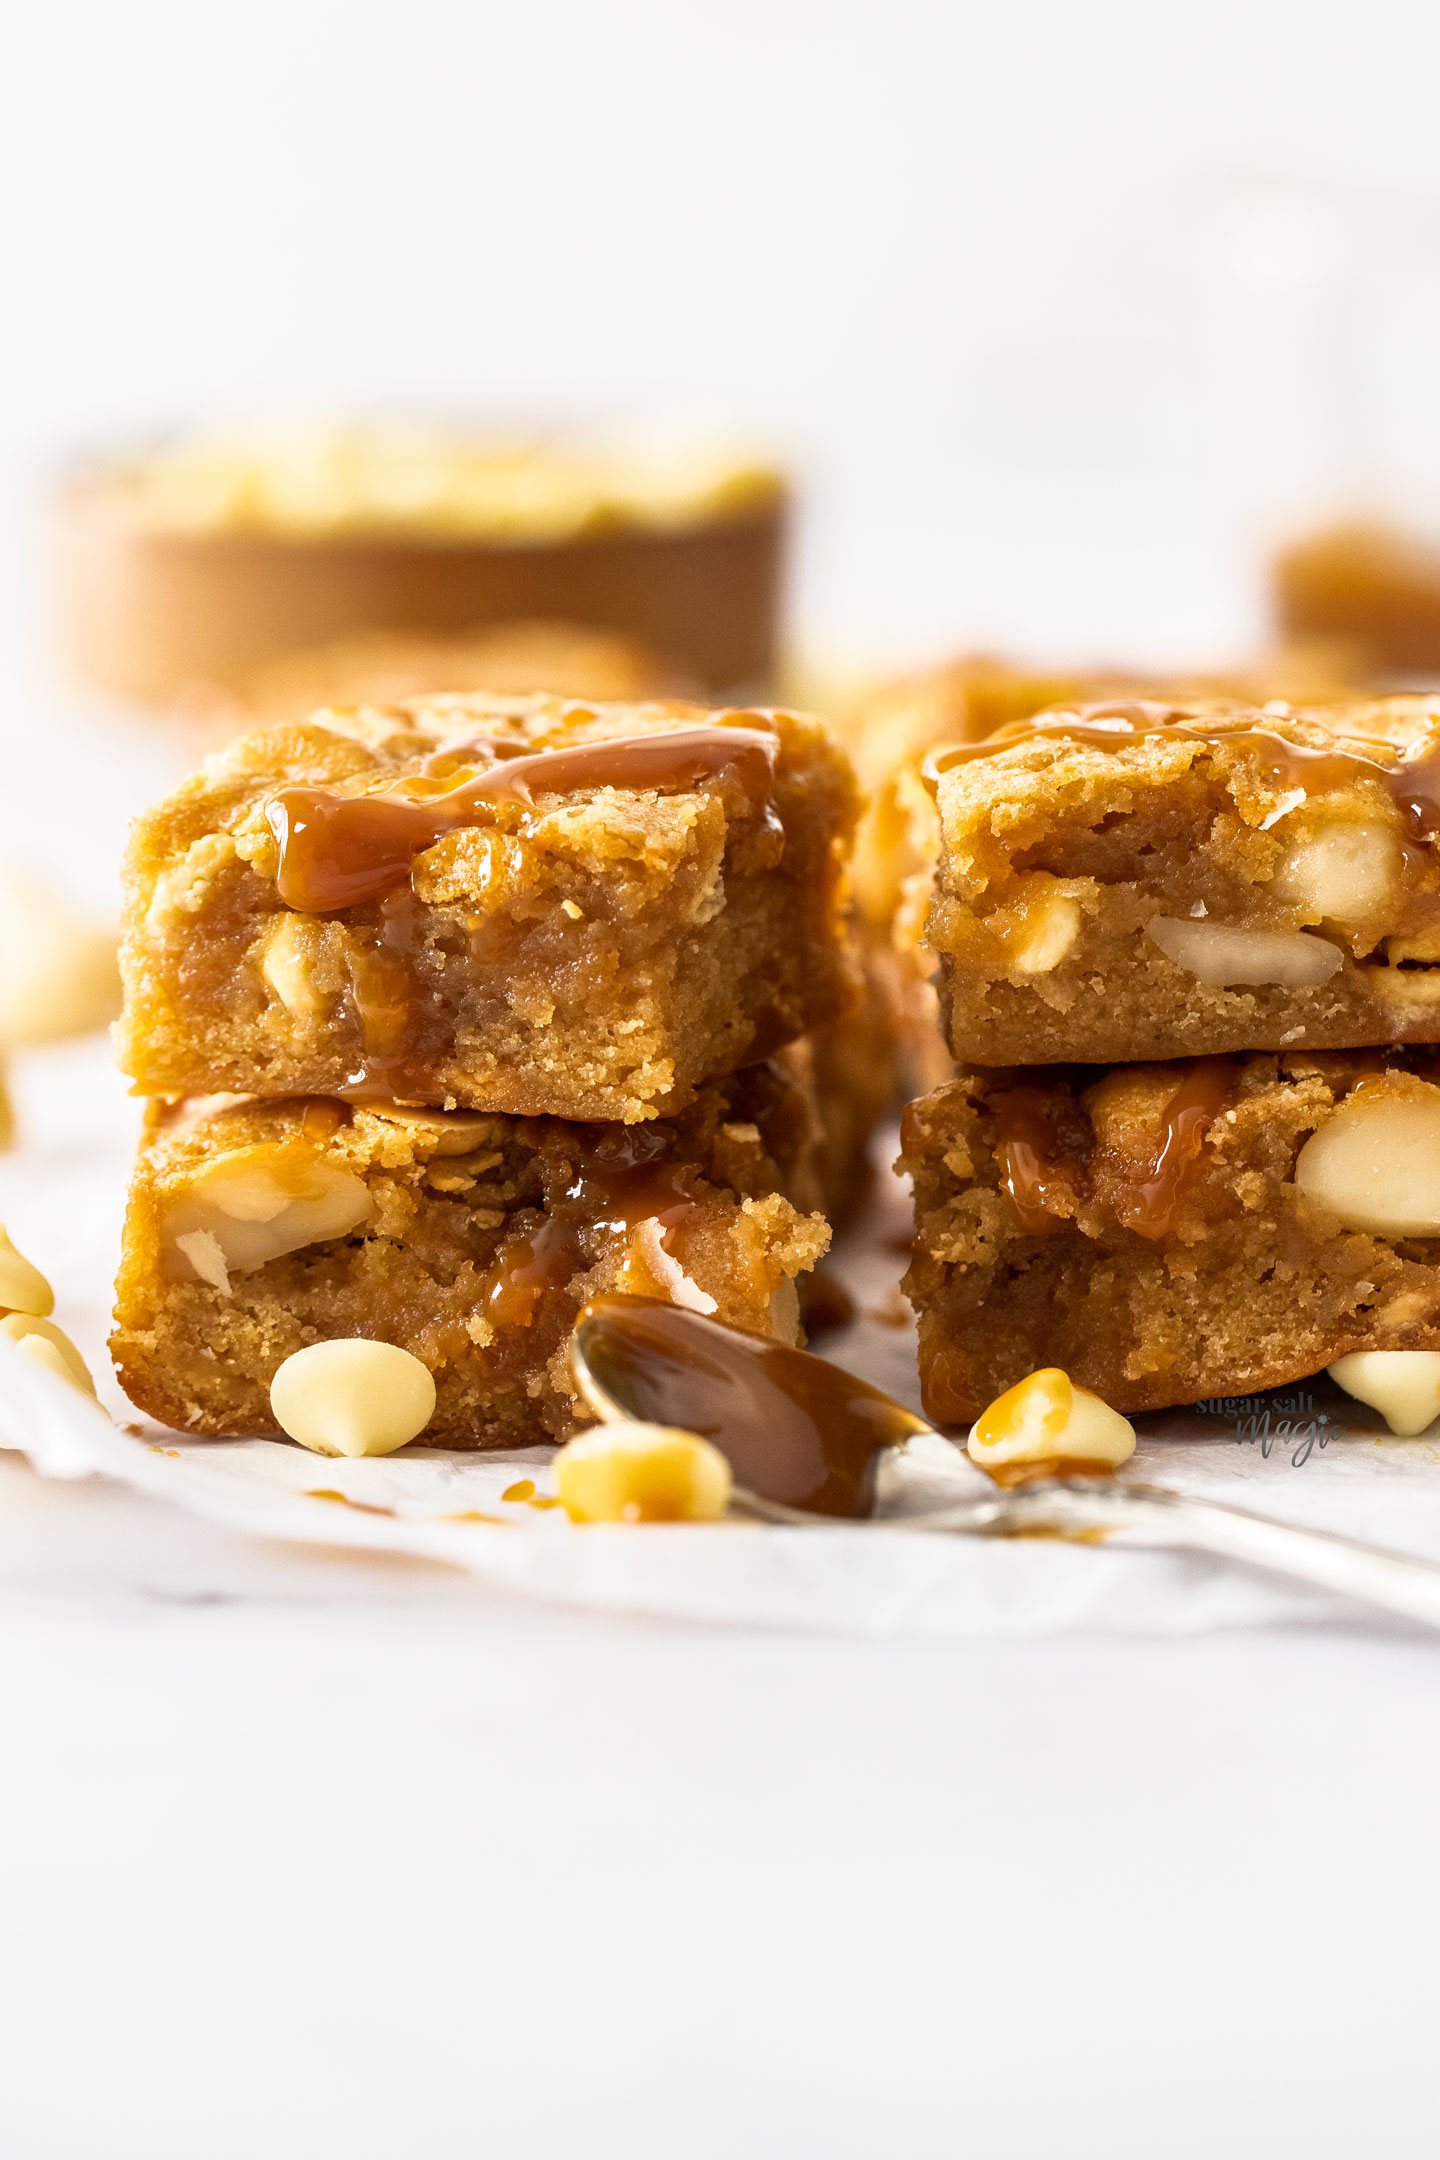 Stacks of 2 blondies with white chocolate chips next to them.